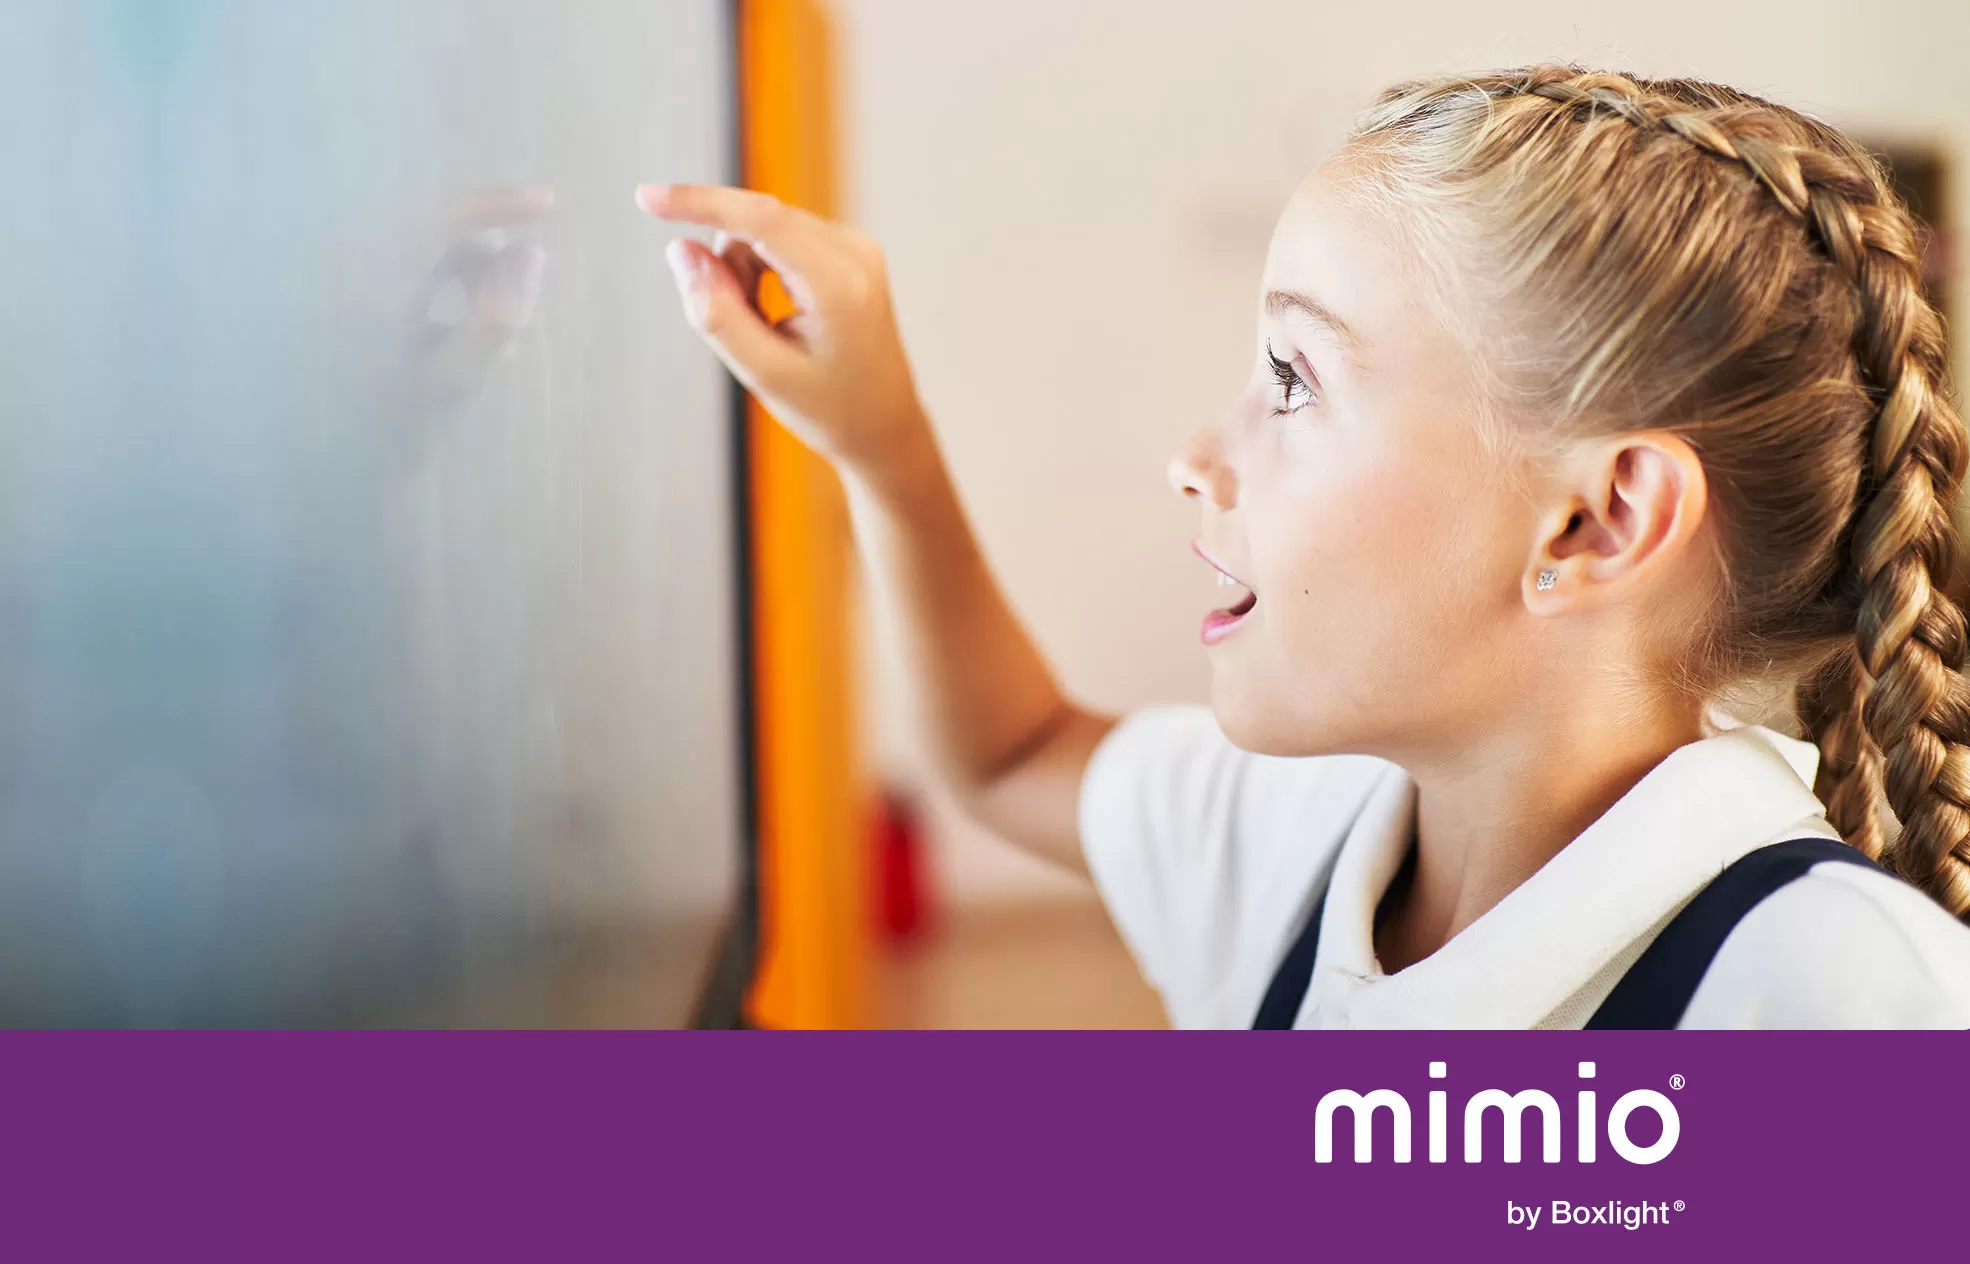 Student using the MimioPro4 touchscreen with a purple banner across the bottom saying 'mimio by Boxlight'